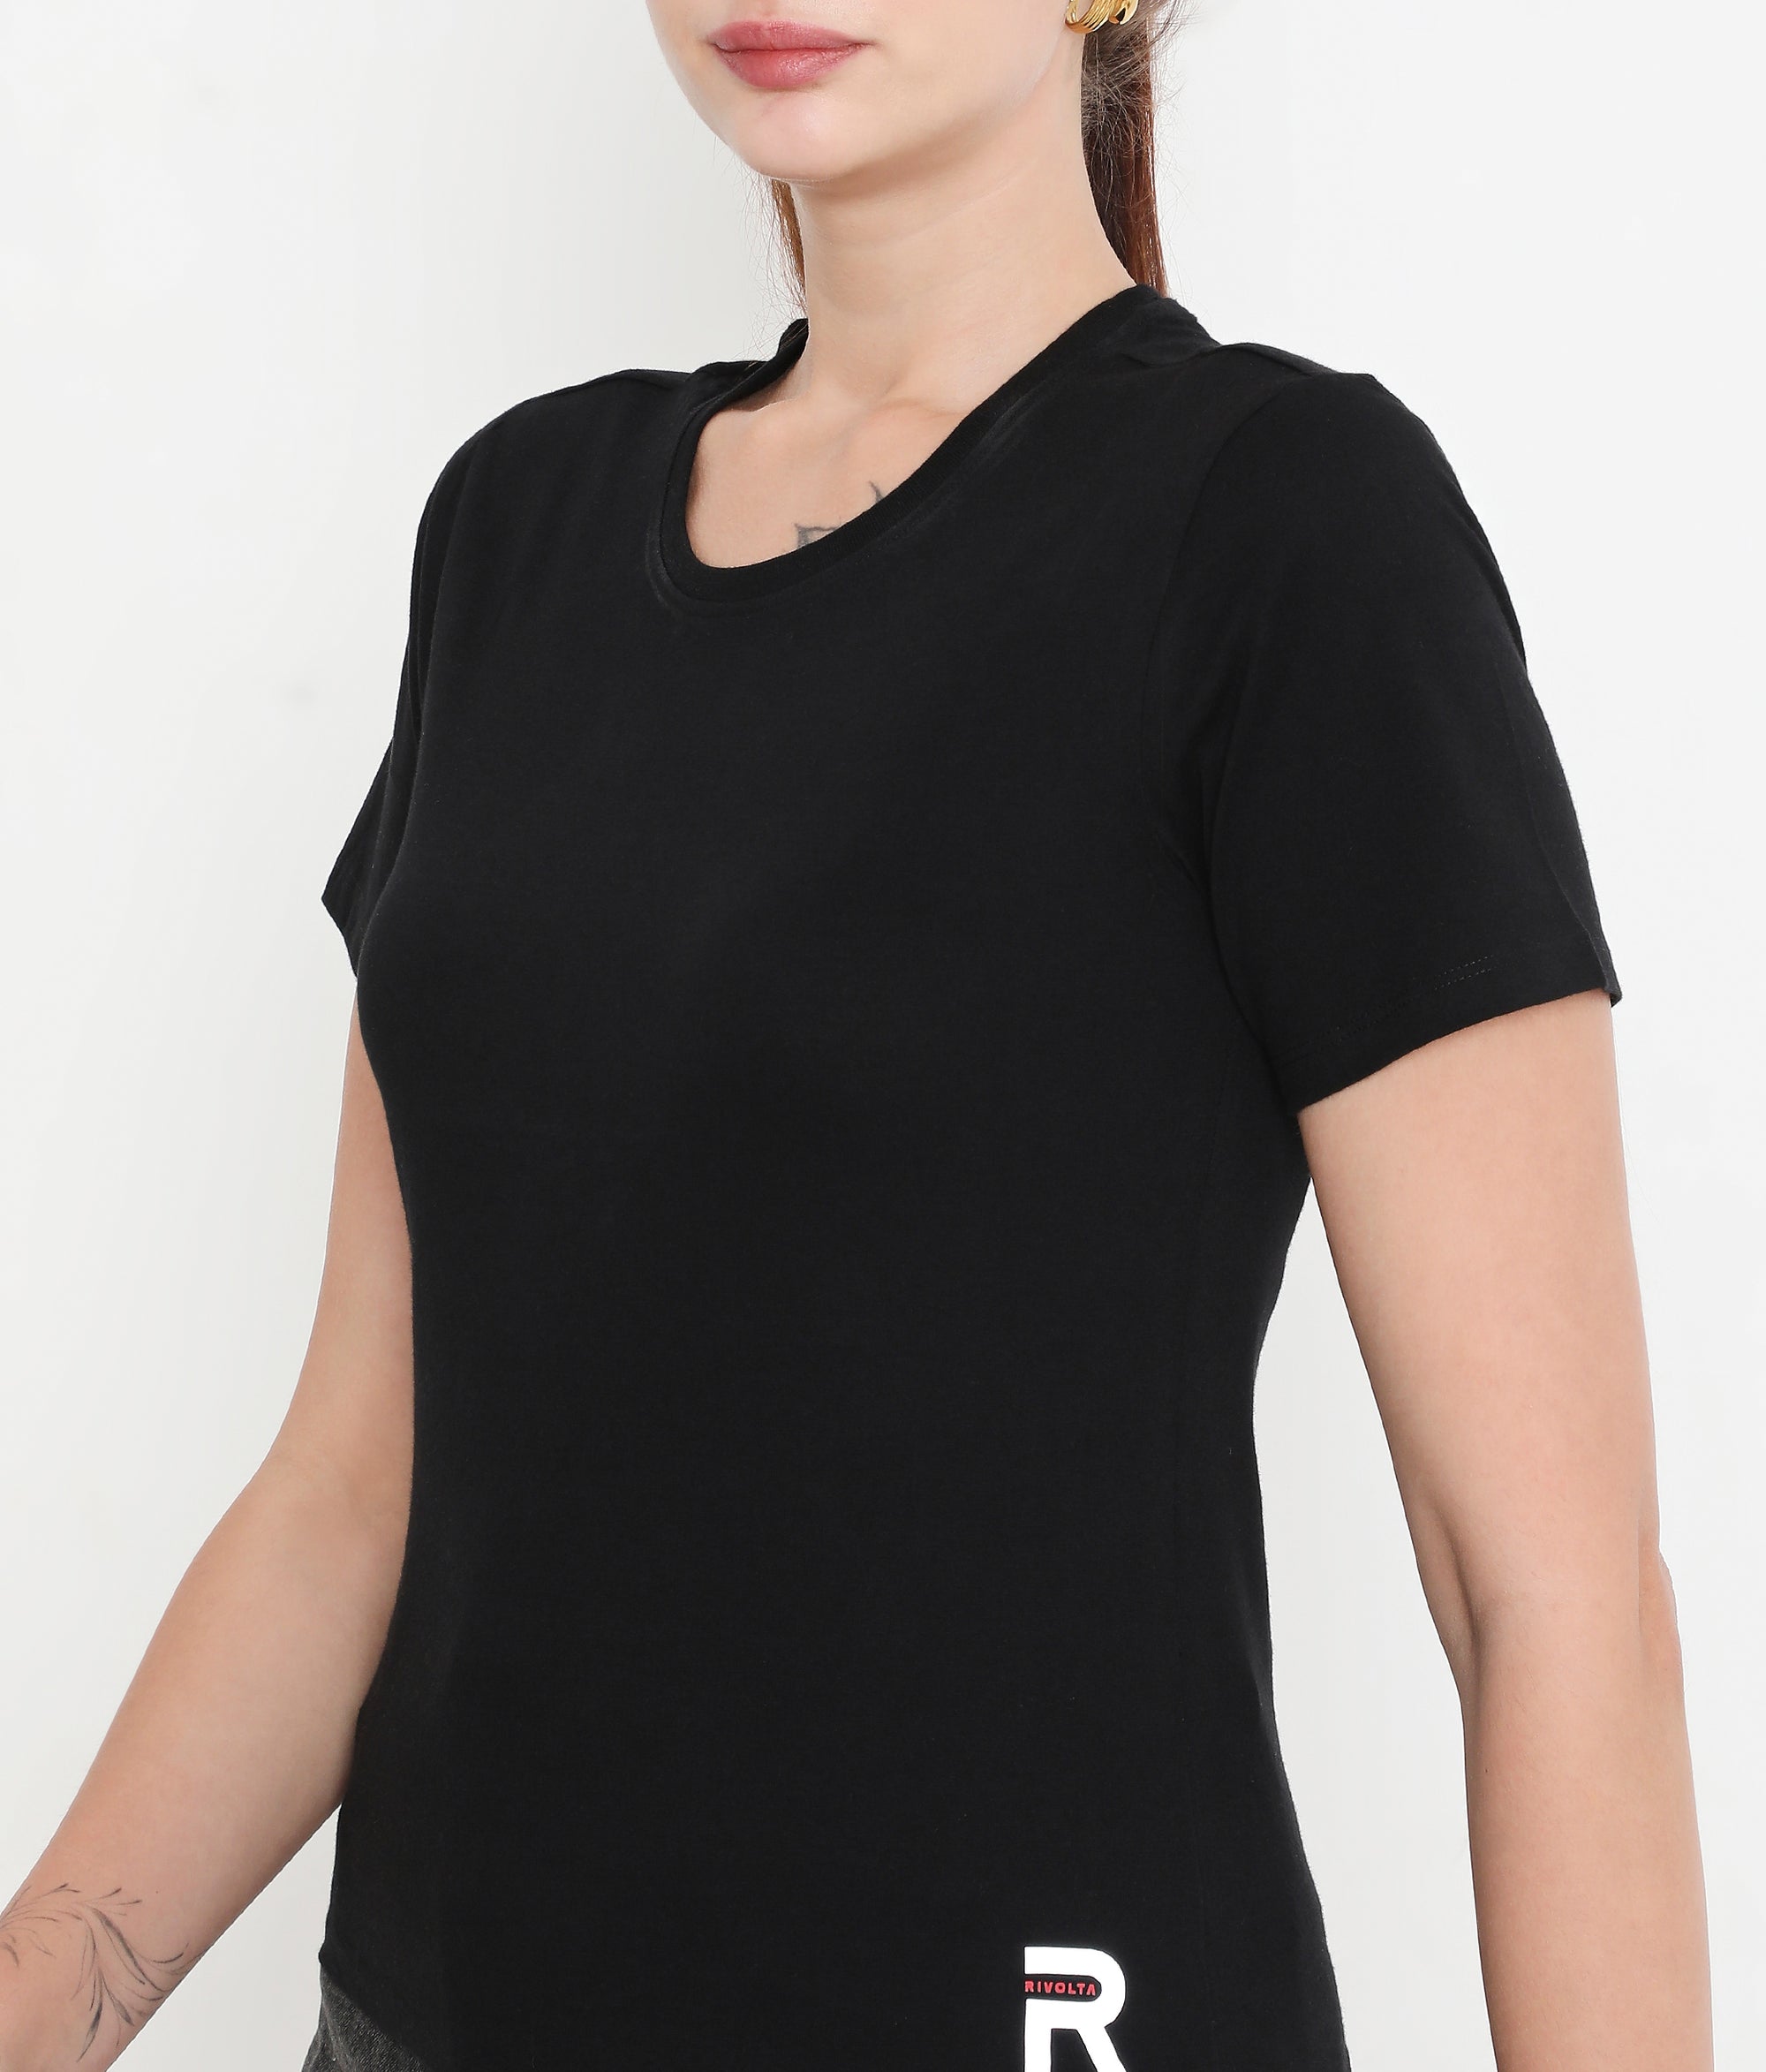 Women Solid Black Round Neck Cotton T-Shirt - 001 – VIP Clothing Limited